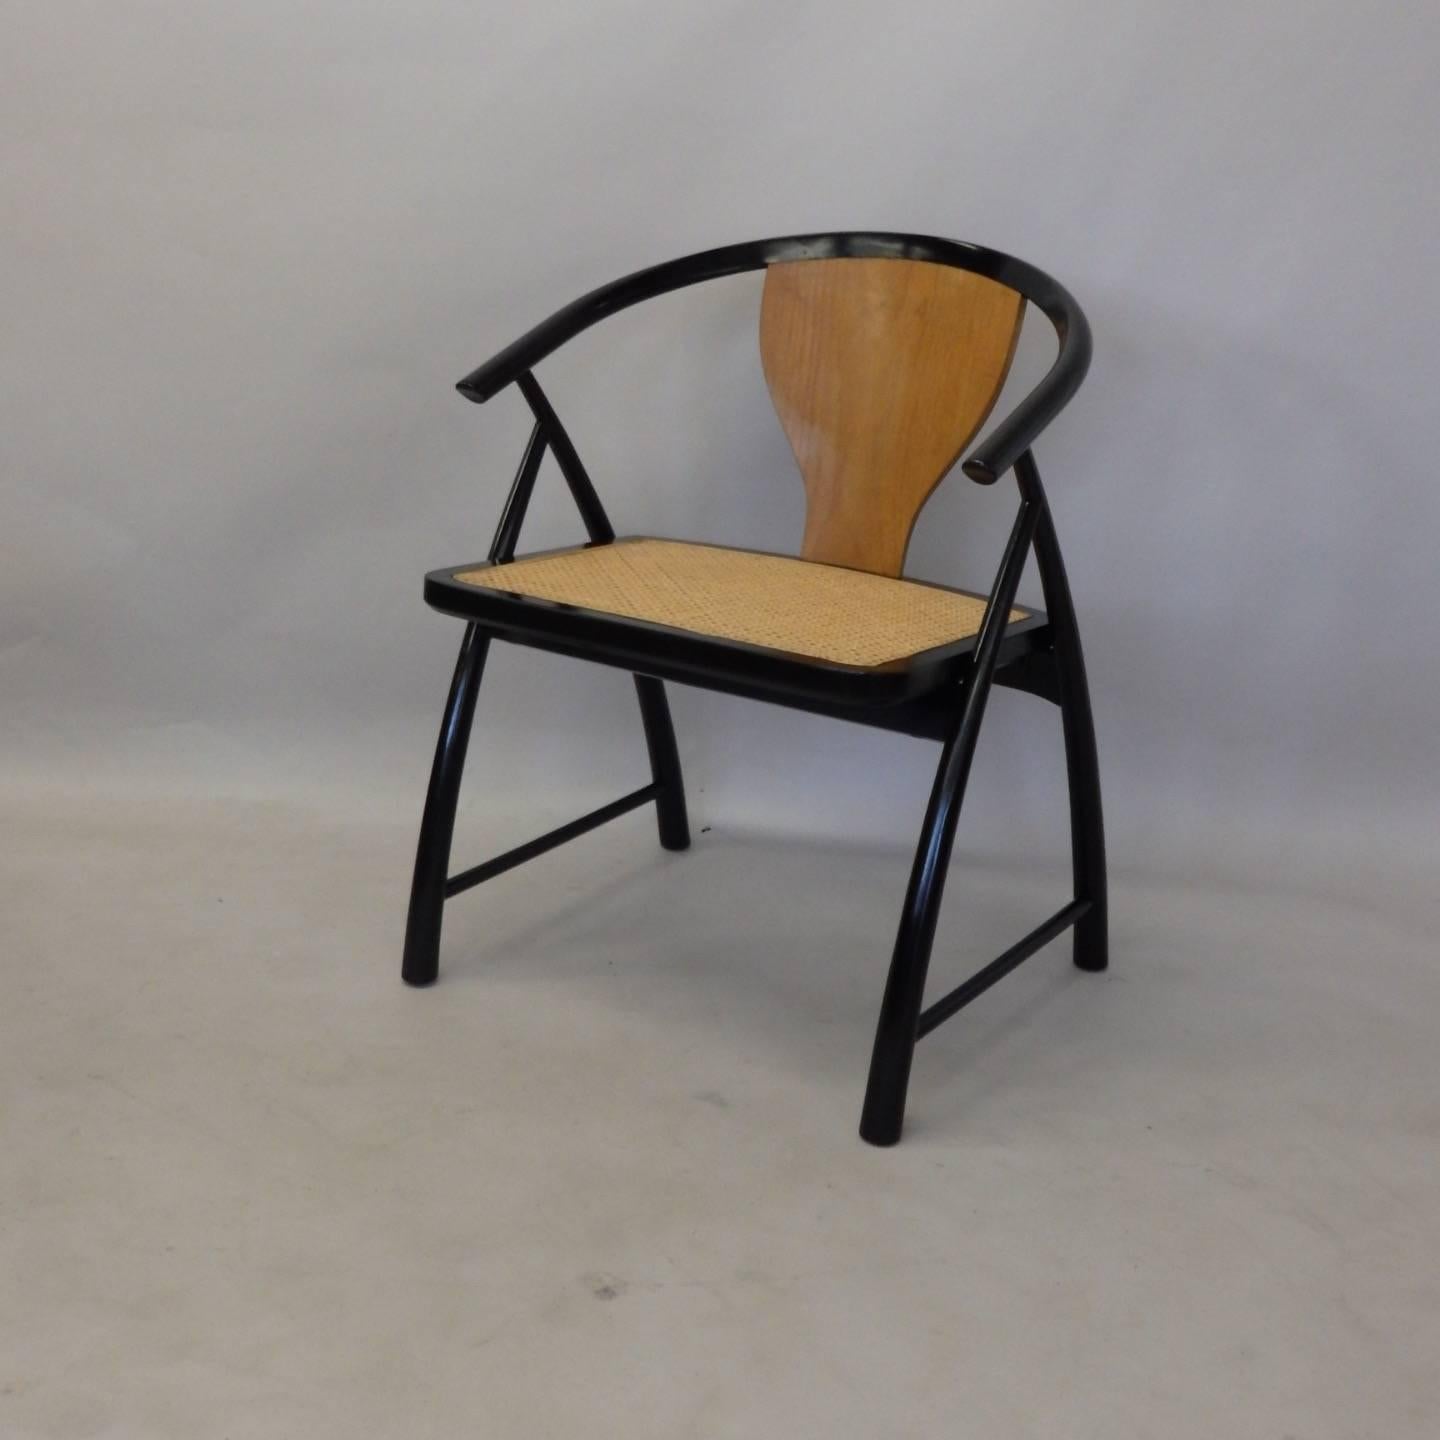 Two-tone blonde with black lacquer cane seat side chair. Michael Taylor for Baker attribution.